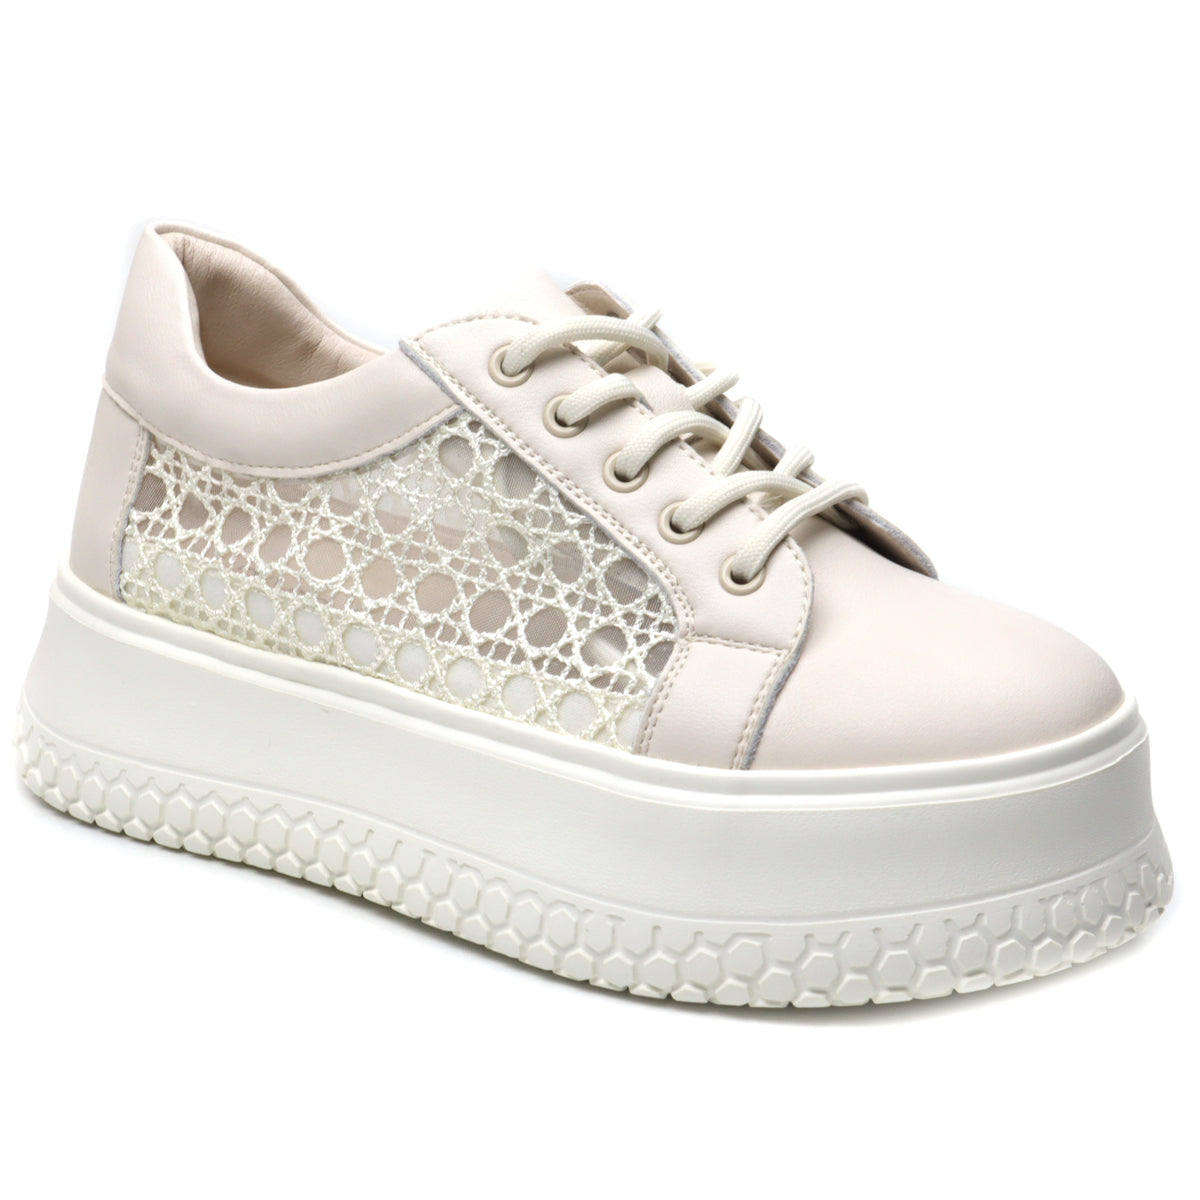 Pass Collection Sneakers dama W1W140030C 52 Z crem ID4000-CRM